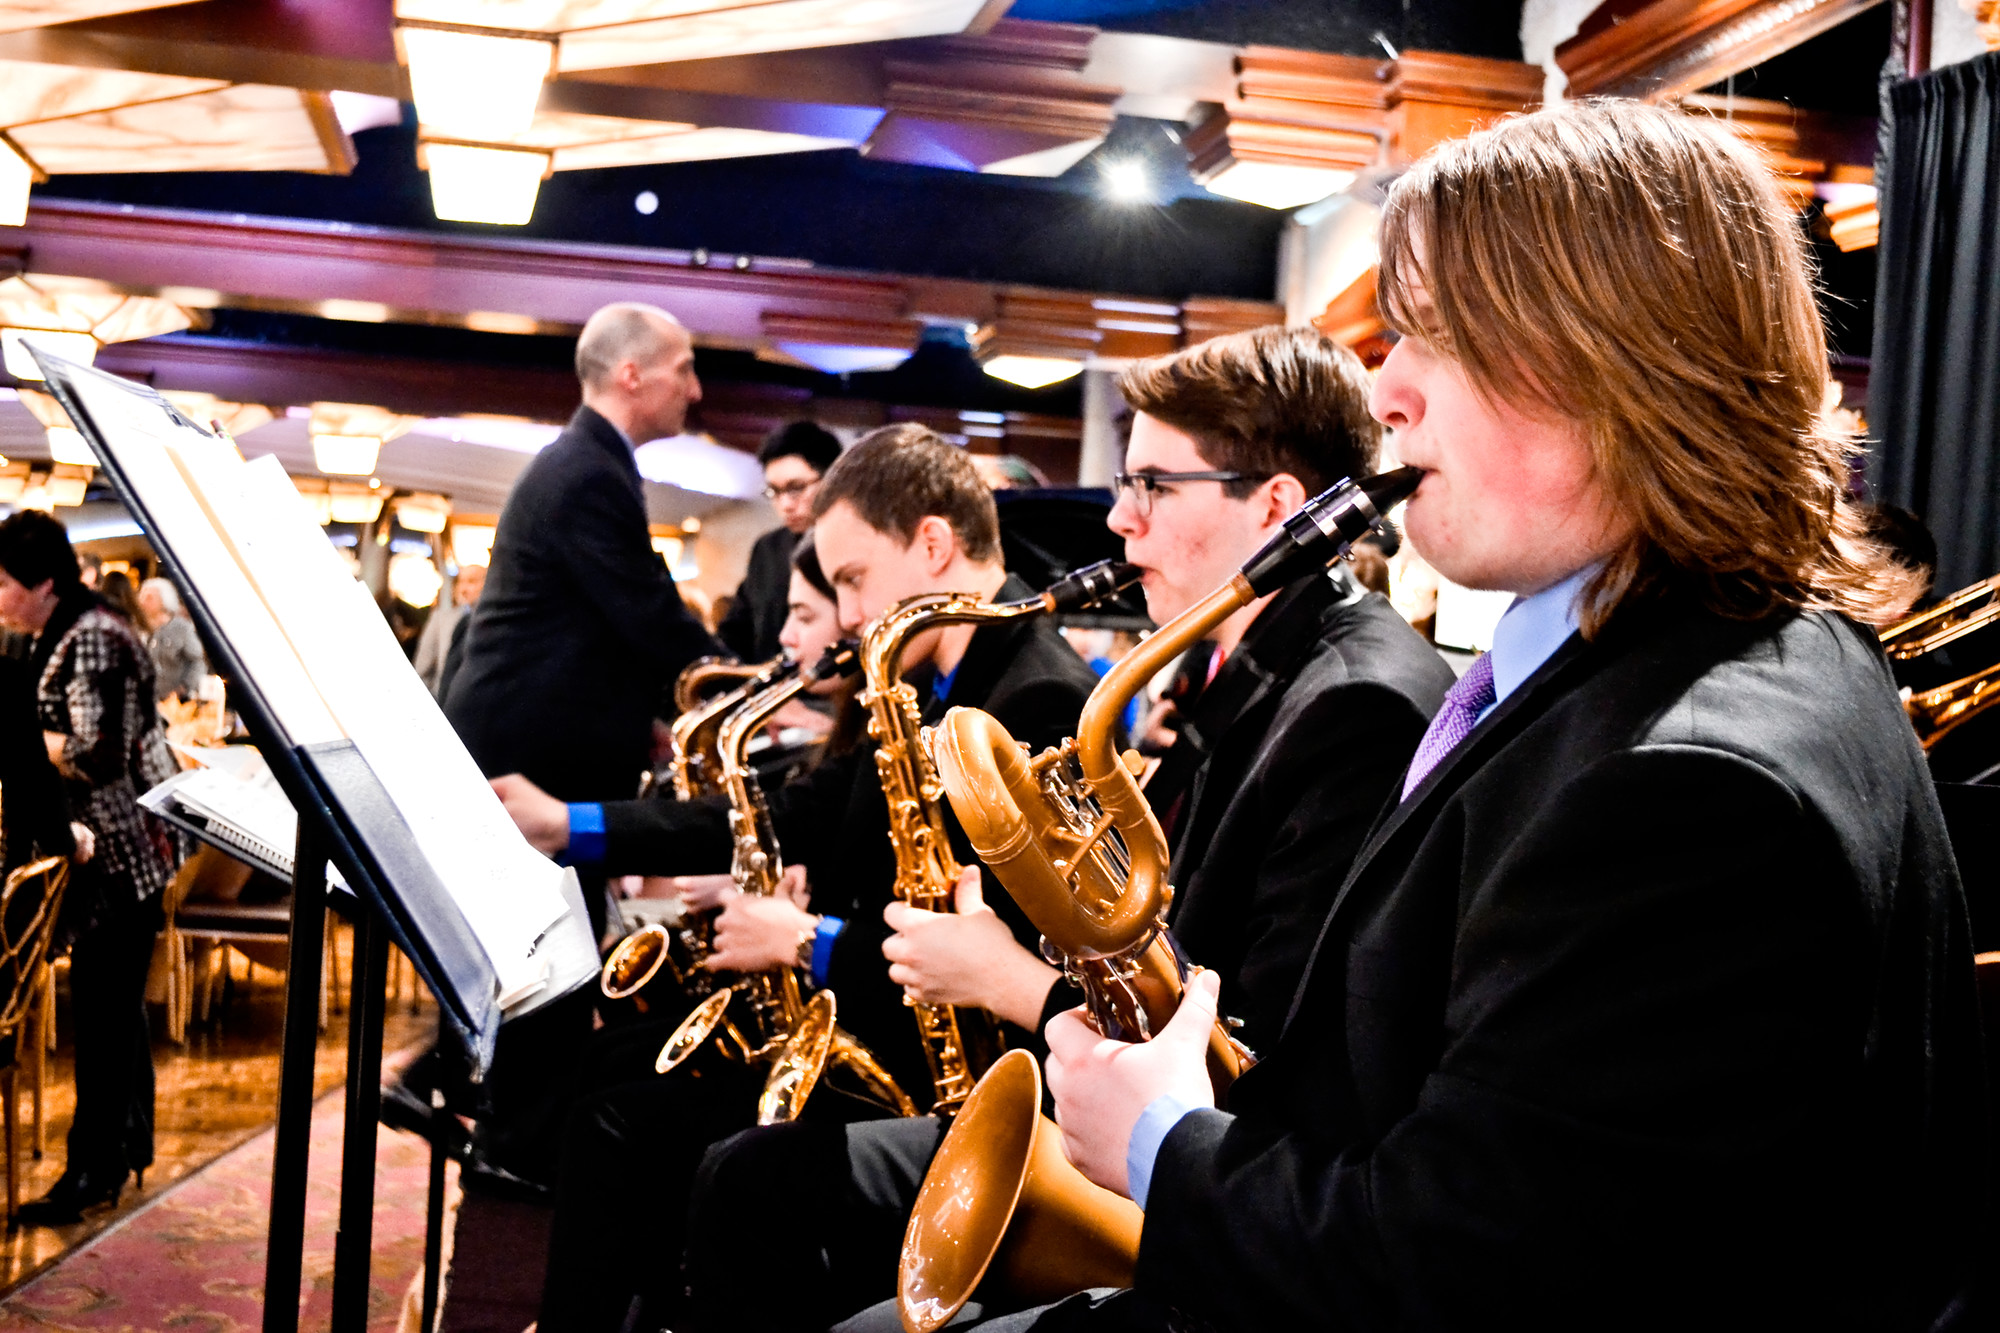 The East Meadow High school jazz ensemble entertained the hundreds in attendance during the night’s cocktail hour at the Crest Hollow Country Club in Woodbury.